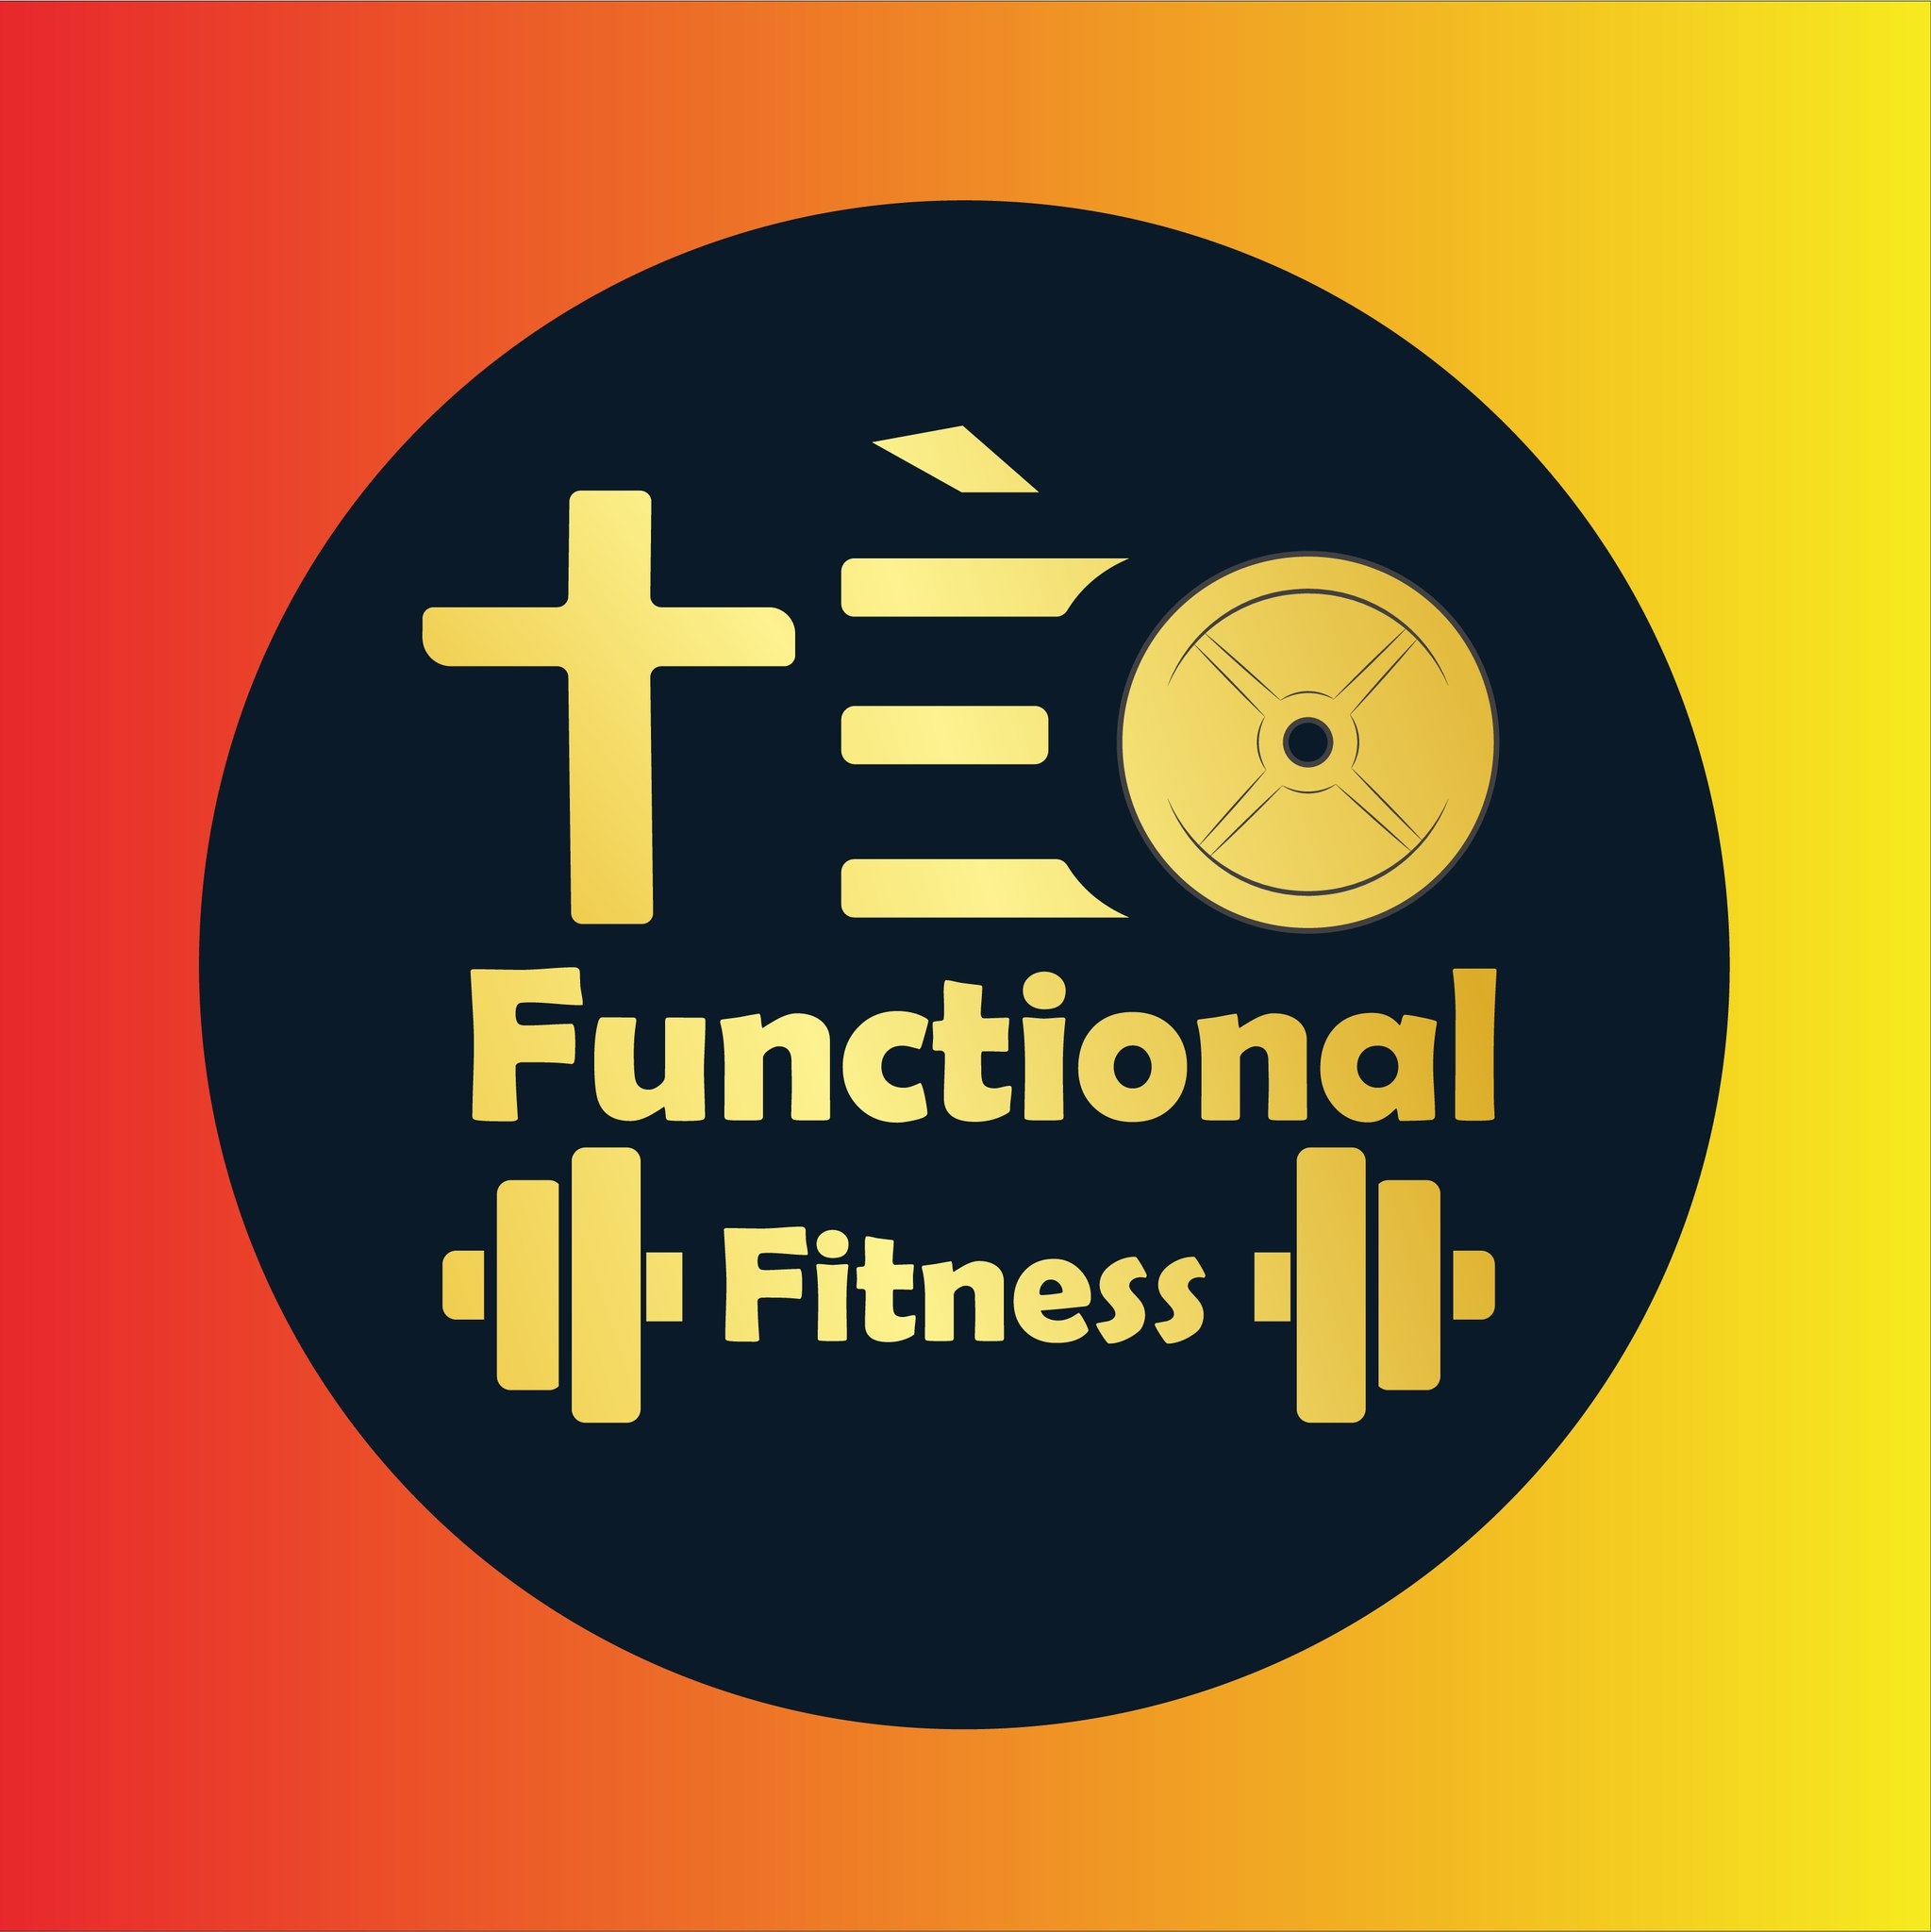 Tèo Functional Fitness